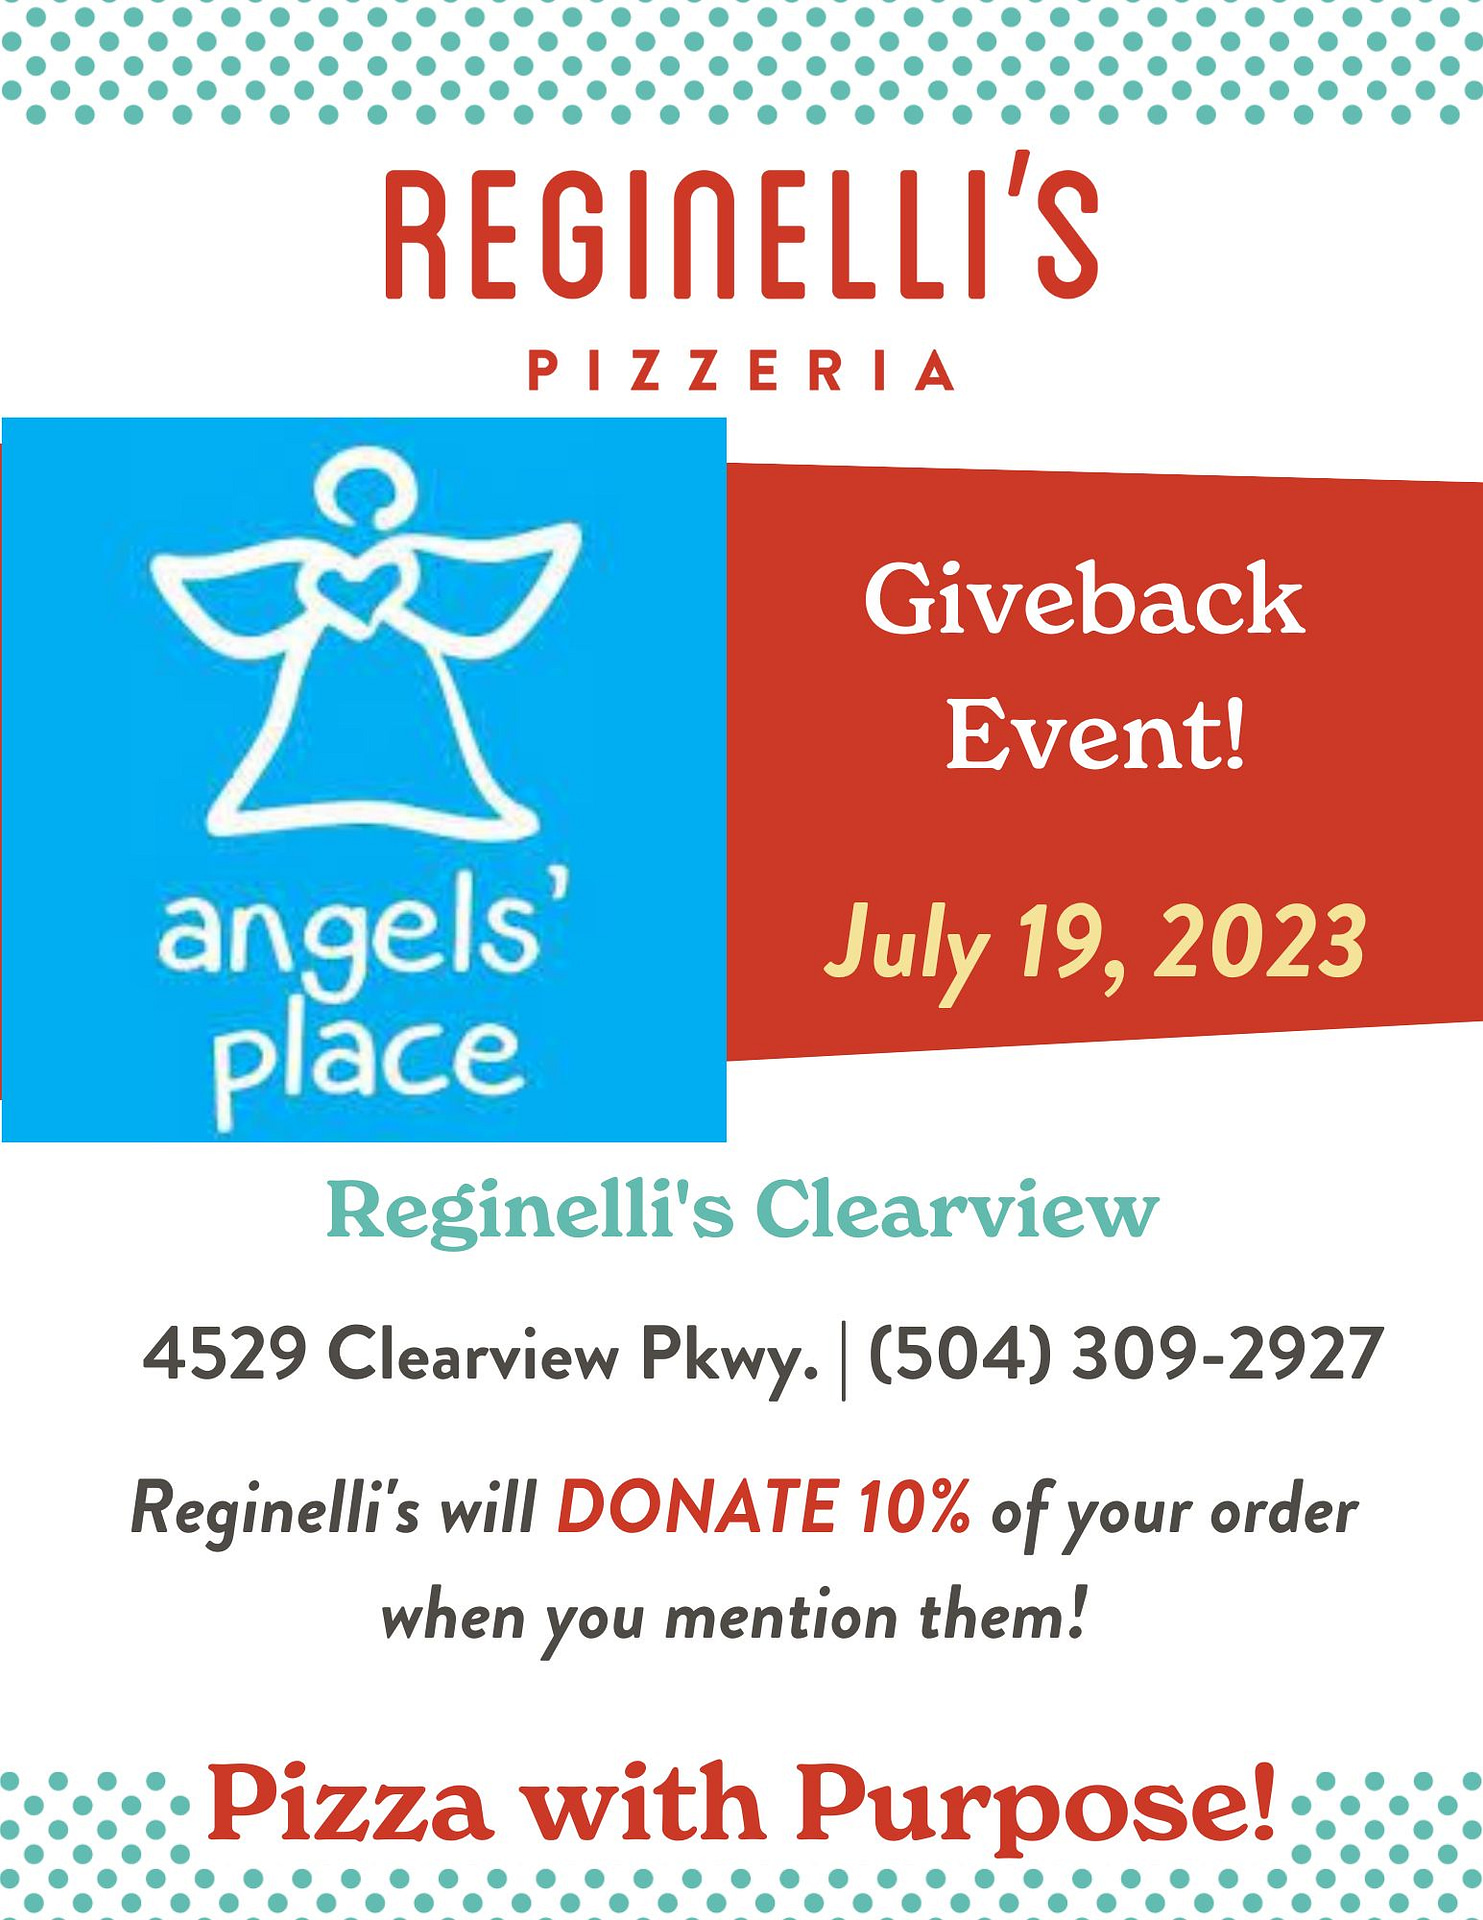 Angels Place Giveback Event July 19, 2023